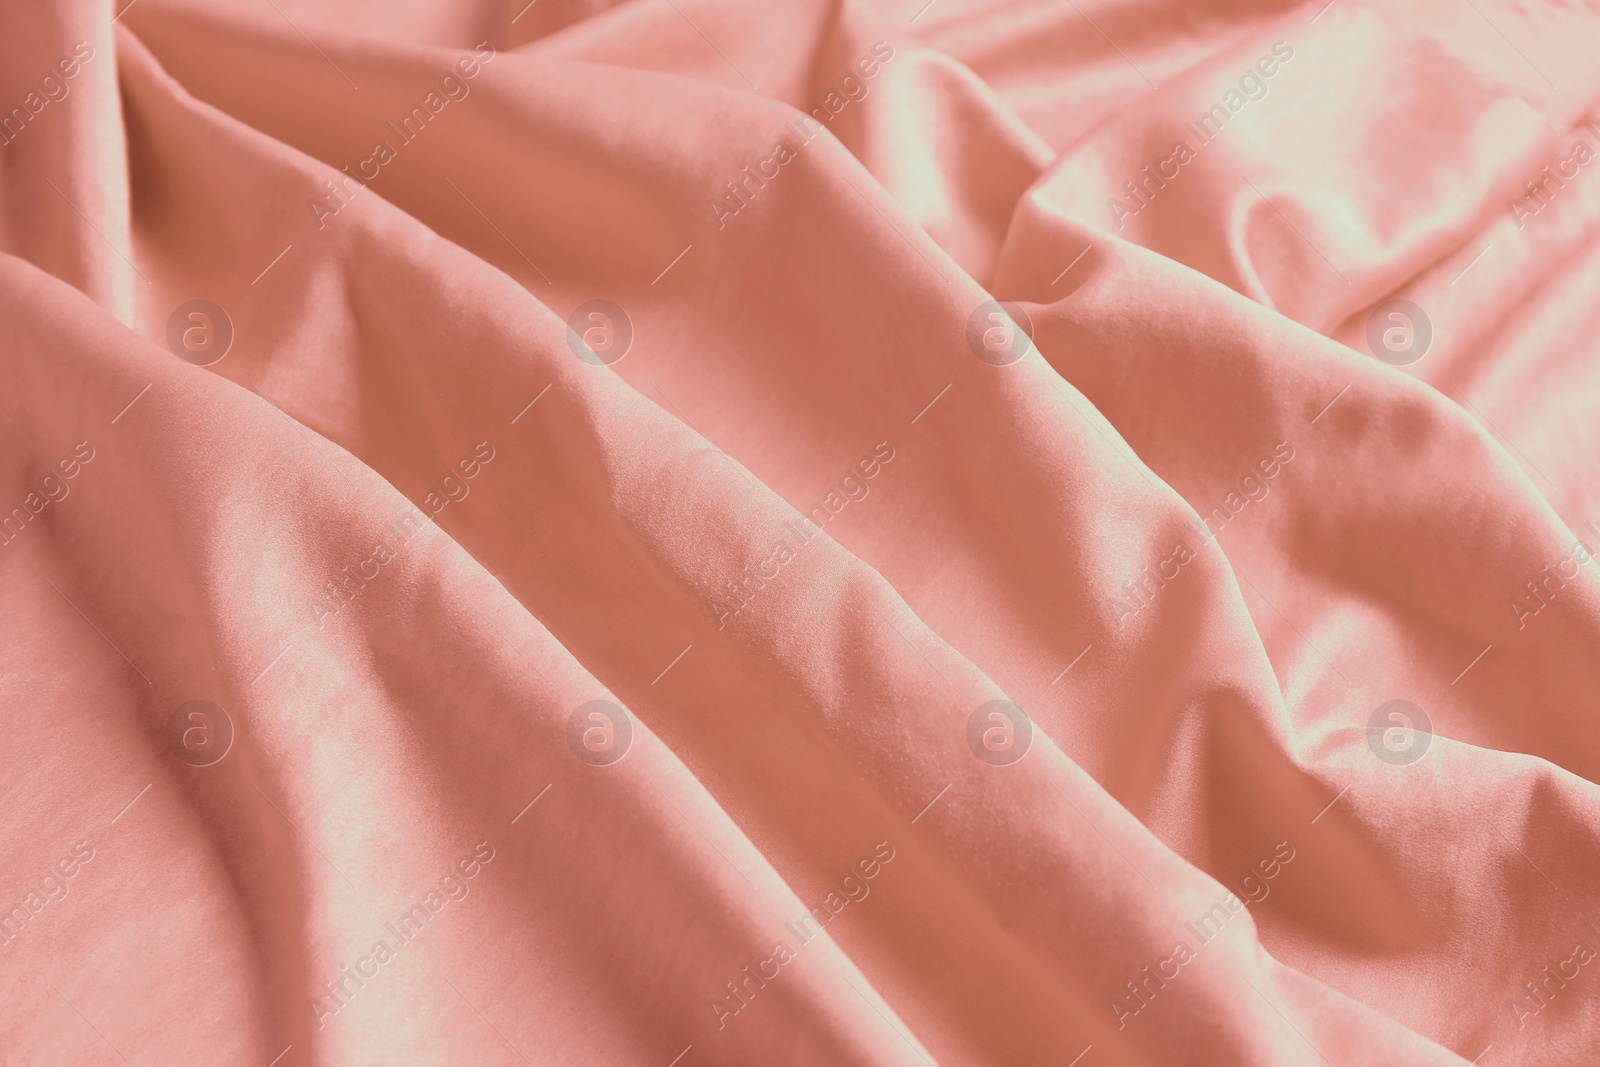 Photo of Pink shiny fabric as background, closeup view